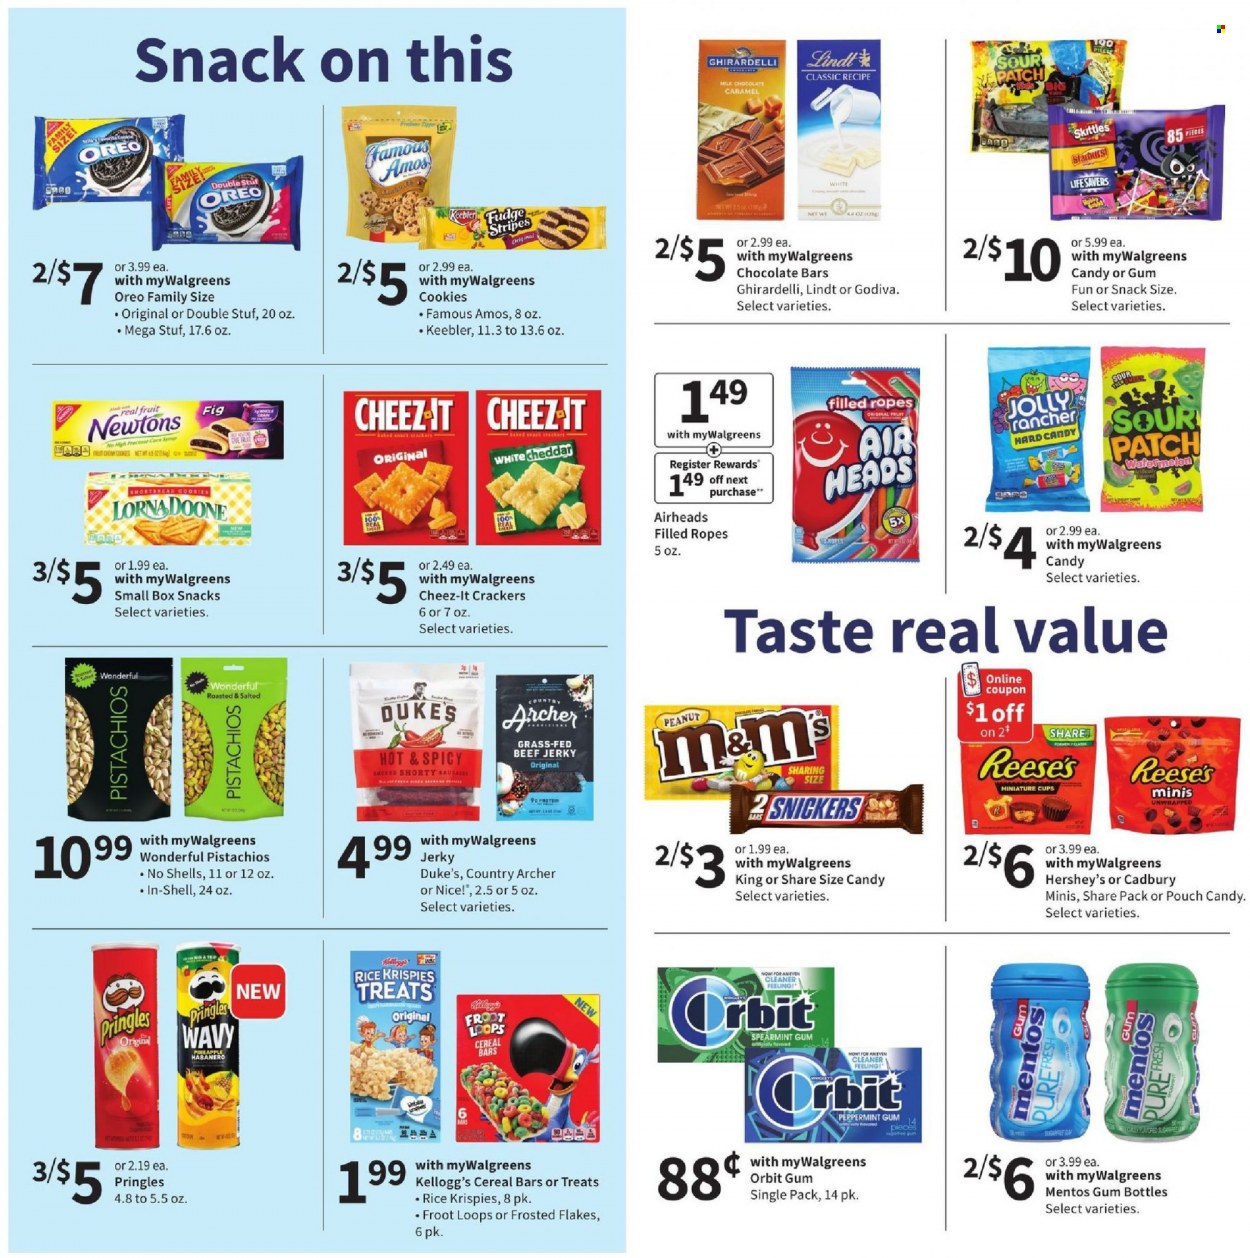 thumbnail - Walgreens Flyer - 09/19/2021 - 09/25/2021 - Sales products - beef jerky, jerky, cheese, Oreo, Reese's, Hershey's, cookies, milk chocolate, Orbit, Mentos, Lindt, Snickers, M&M's, Godiva, cereal bar, AirHeads, crackers, Kellogg's, Cadbury, Skittles, Ghirardelli, Keebler, Sour Patch, chocolate bar, Pringles, Nice!, Cheez-It, cereals, Rice Krispies, Frosted Flakes, caramel, pistachios, cleaner. Page 5.